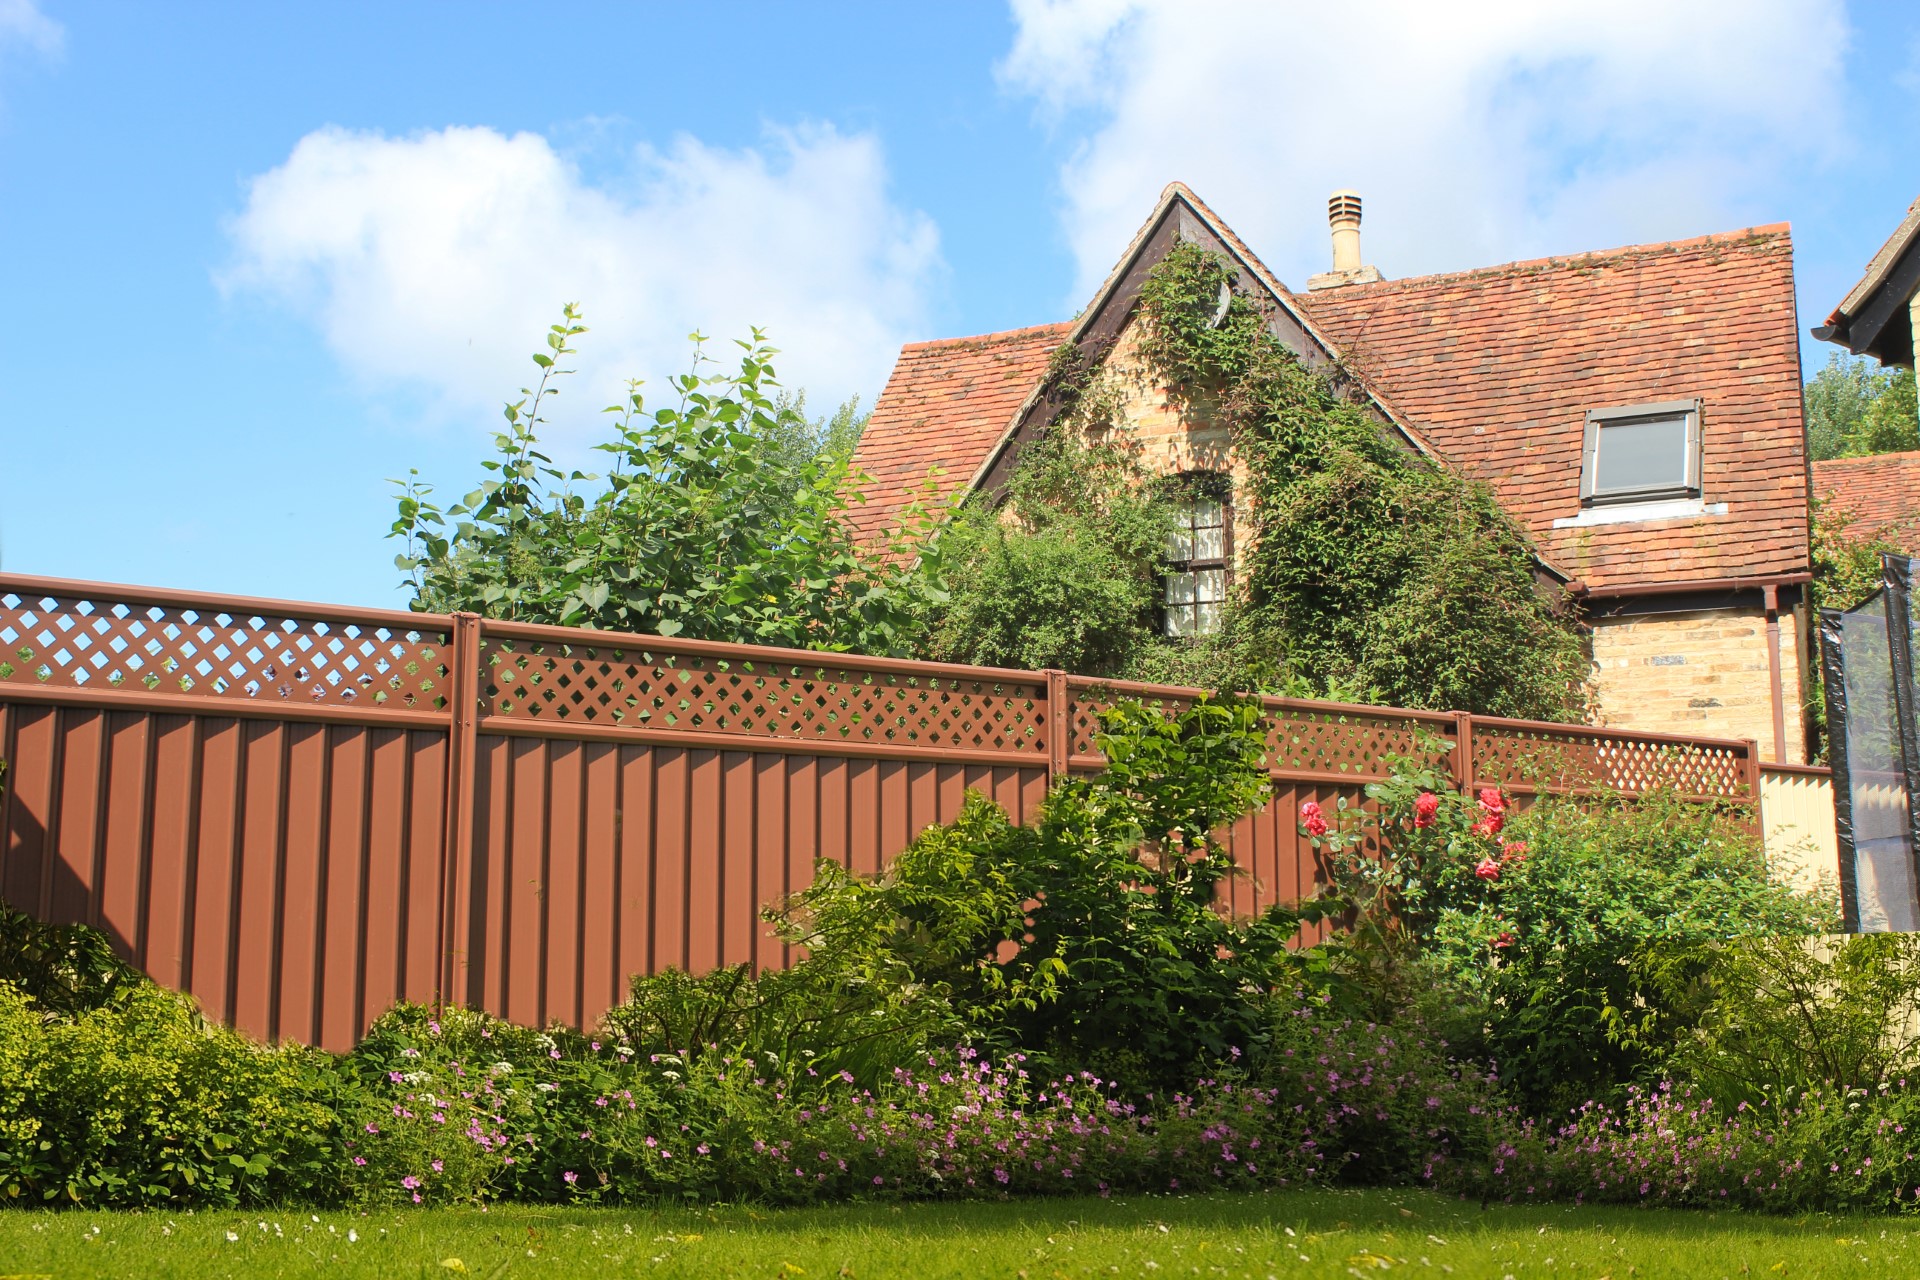 ColourFence has installed more than 100,000 fences throughout the UK.